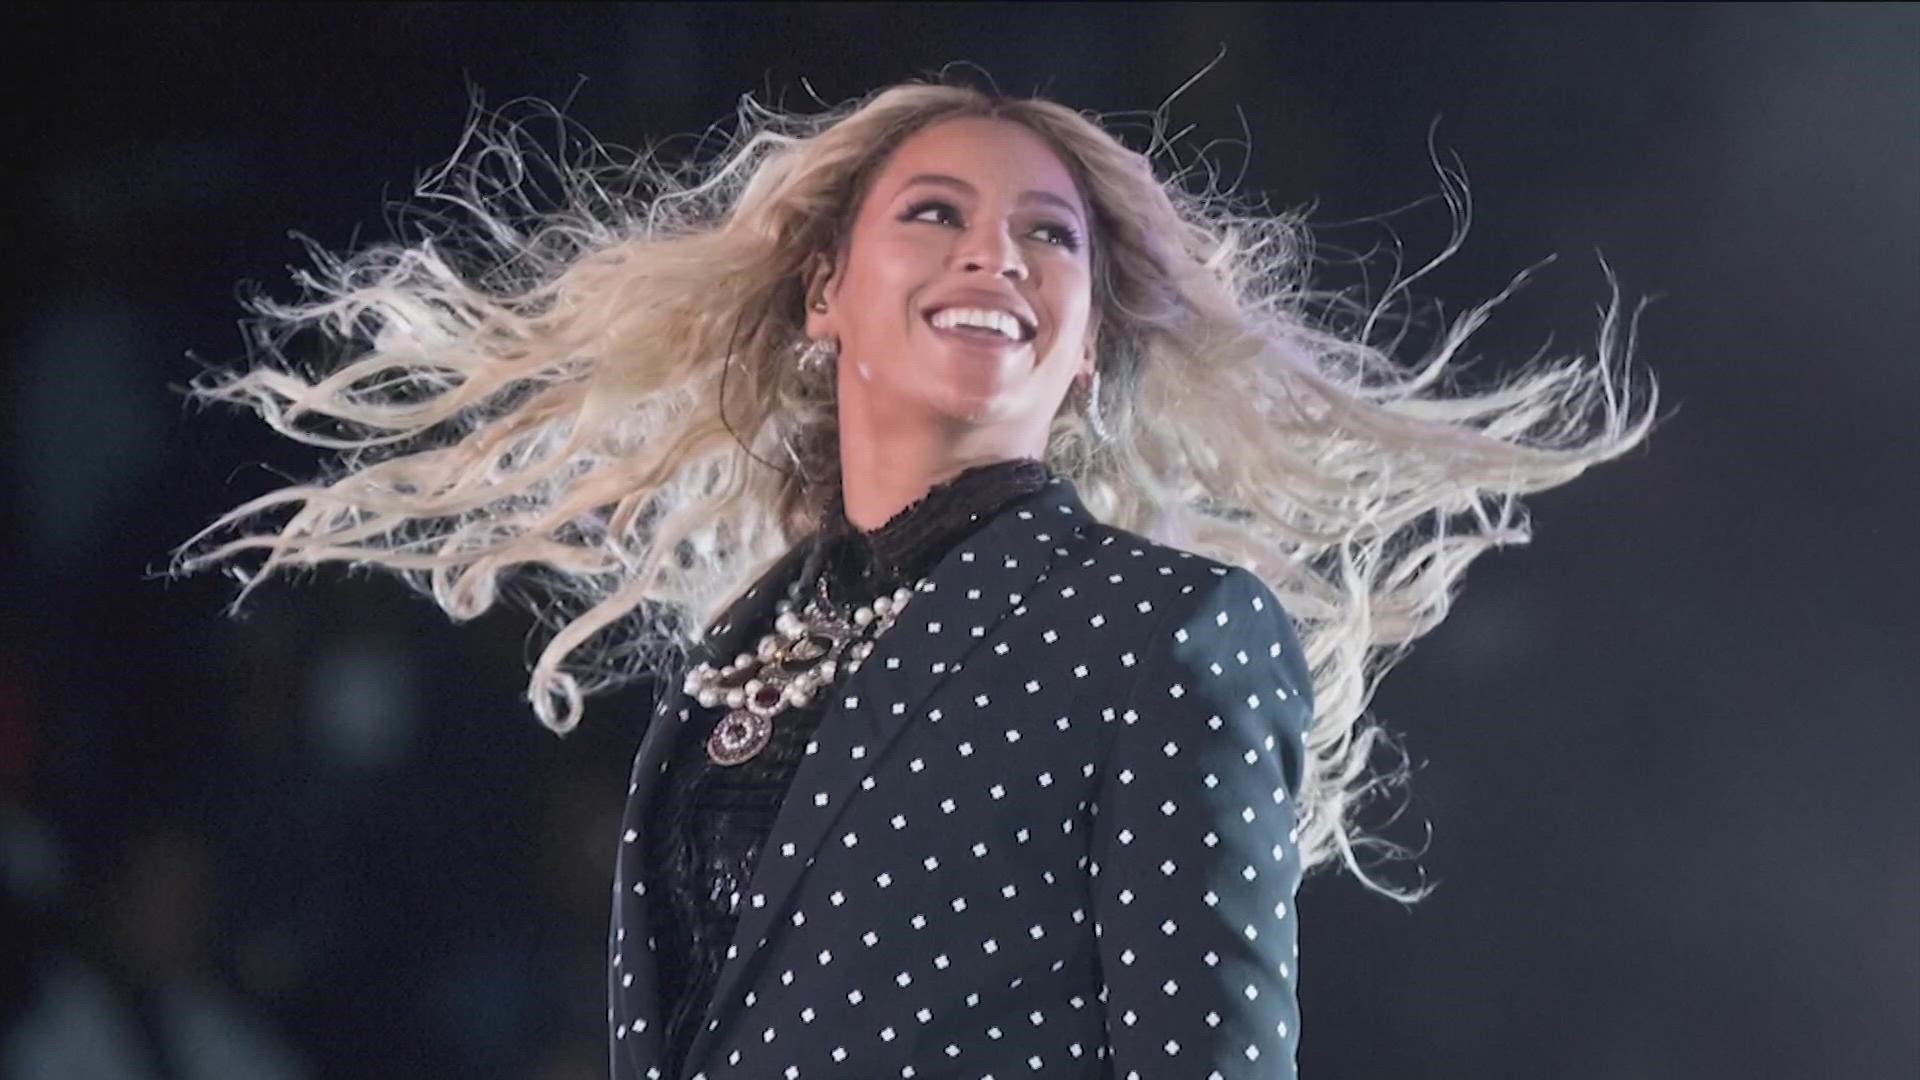 The tour kicks off in Europe in May, but "Queen B" will be coming to Atlanta Aug. 11.